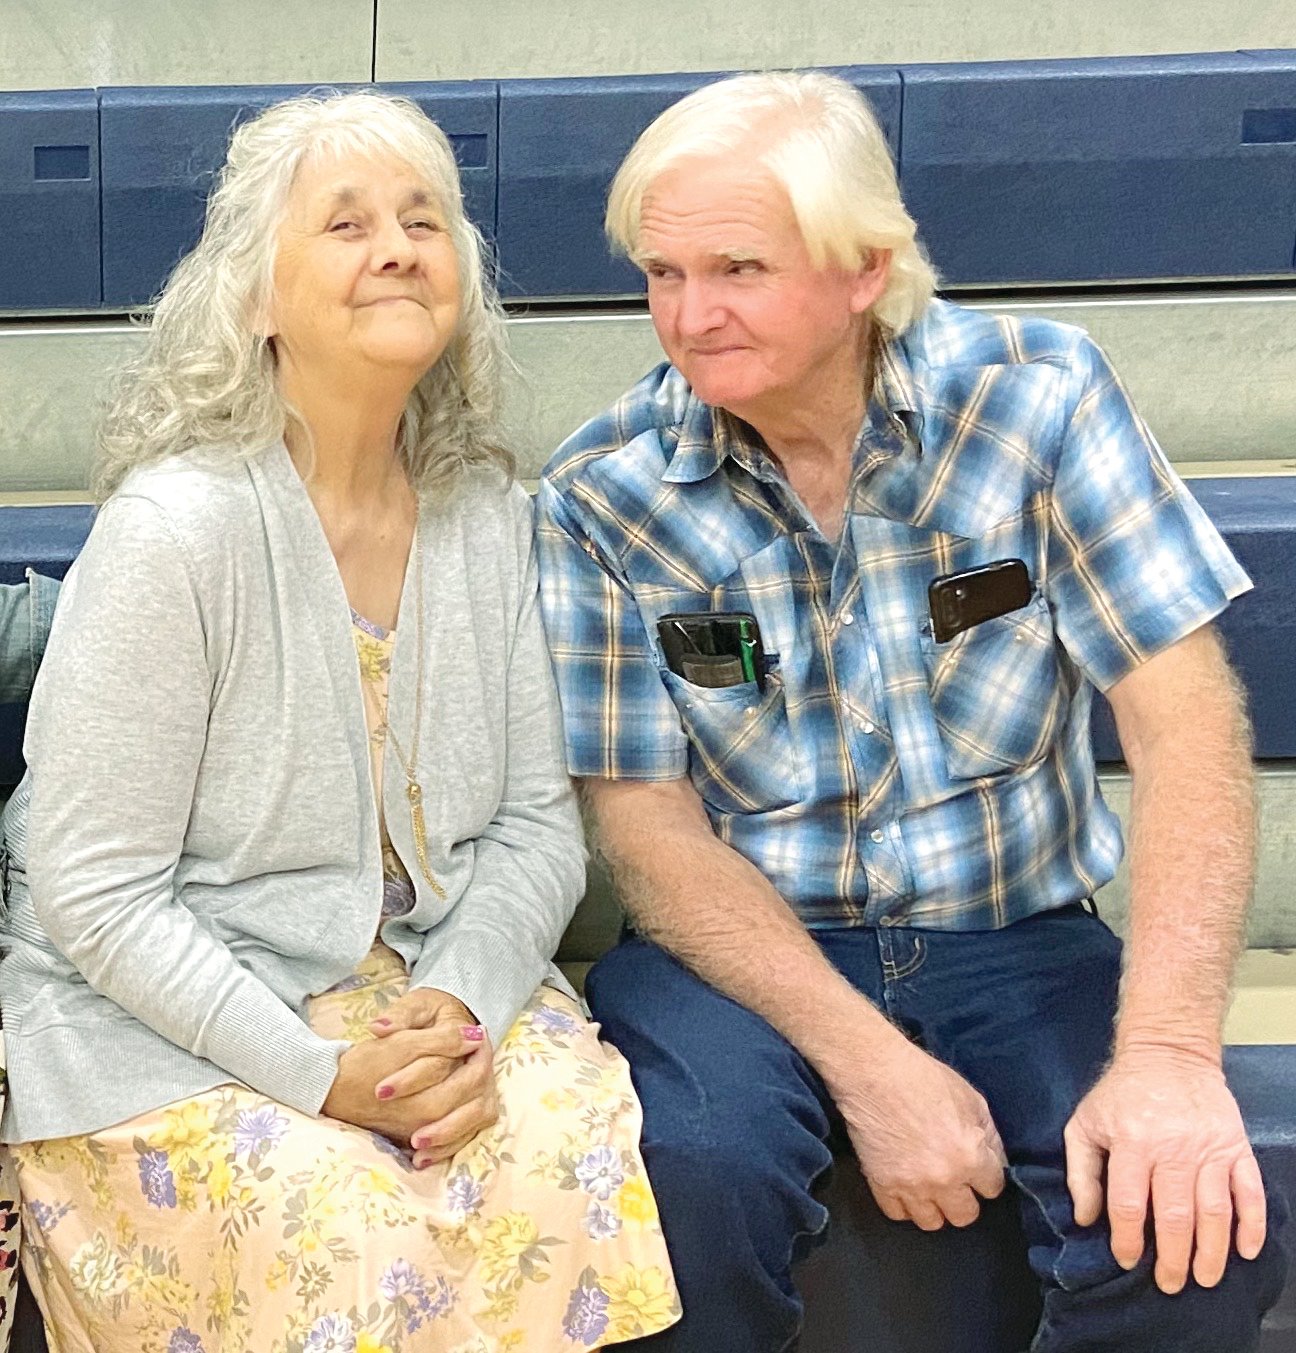 Kary and Debbie Middleton are celebrating their 50th wedding anniversary.